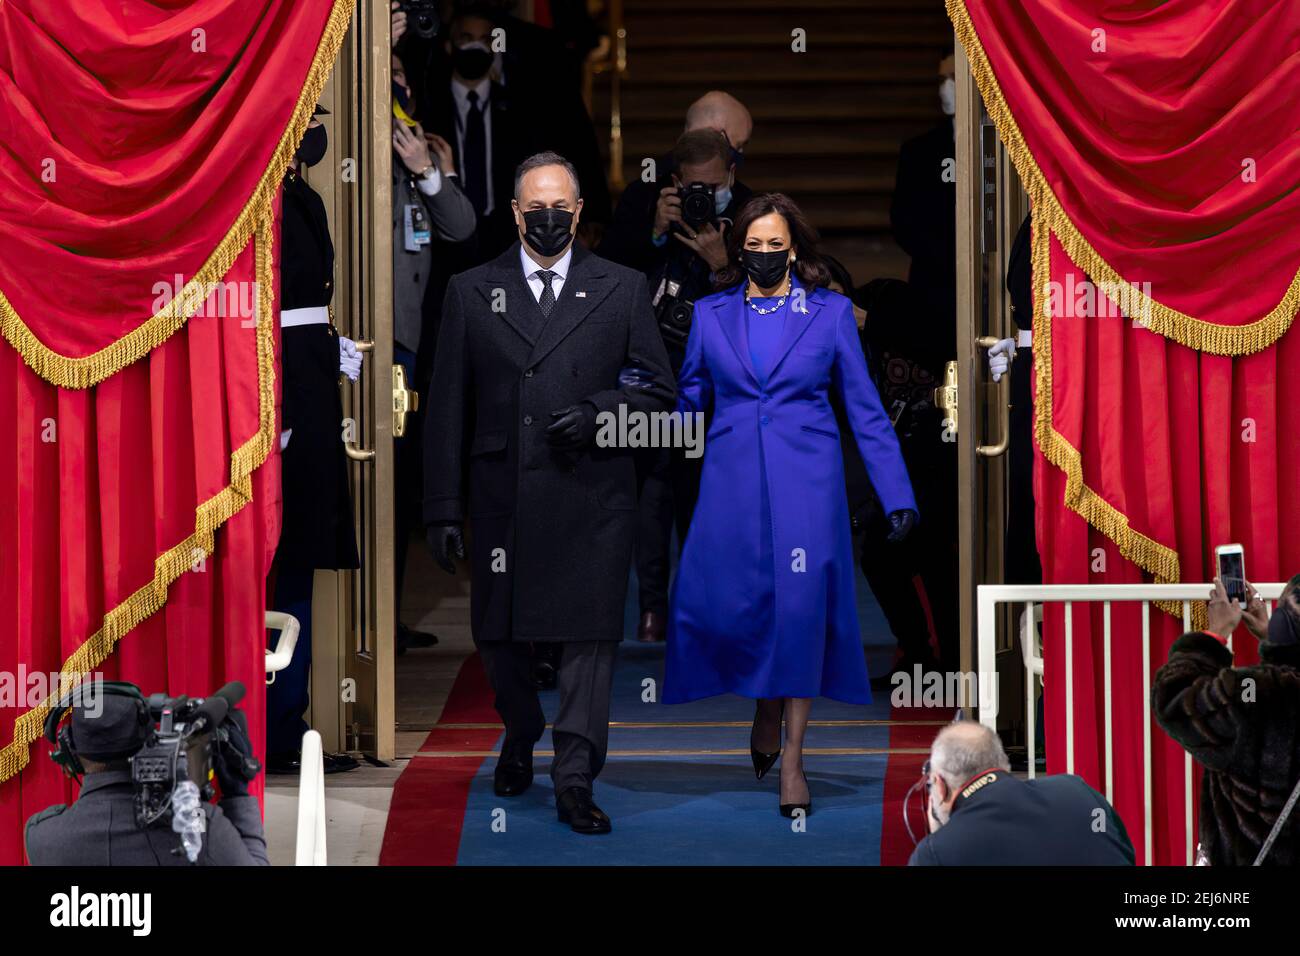 Vice President-elect Kamala Harris and her husband Mr. Doug Emhoff arrive to the inaugural platform for the 59th Presidential Inauguration Wednesday, Jan. 20, 2021, at the U.S. Capitol in Washington, D.C. (Official White House Photo by Chuck Kennedy) Stock Photo